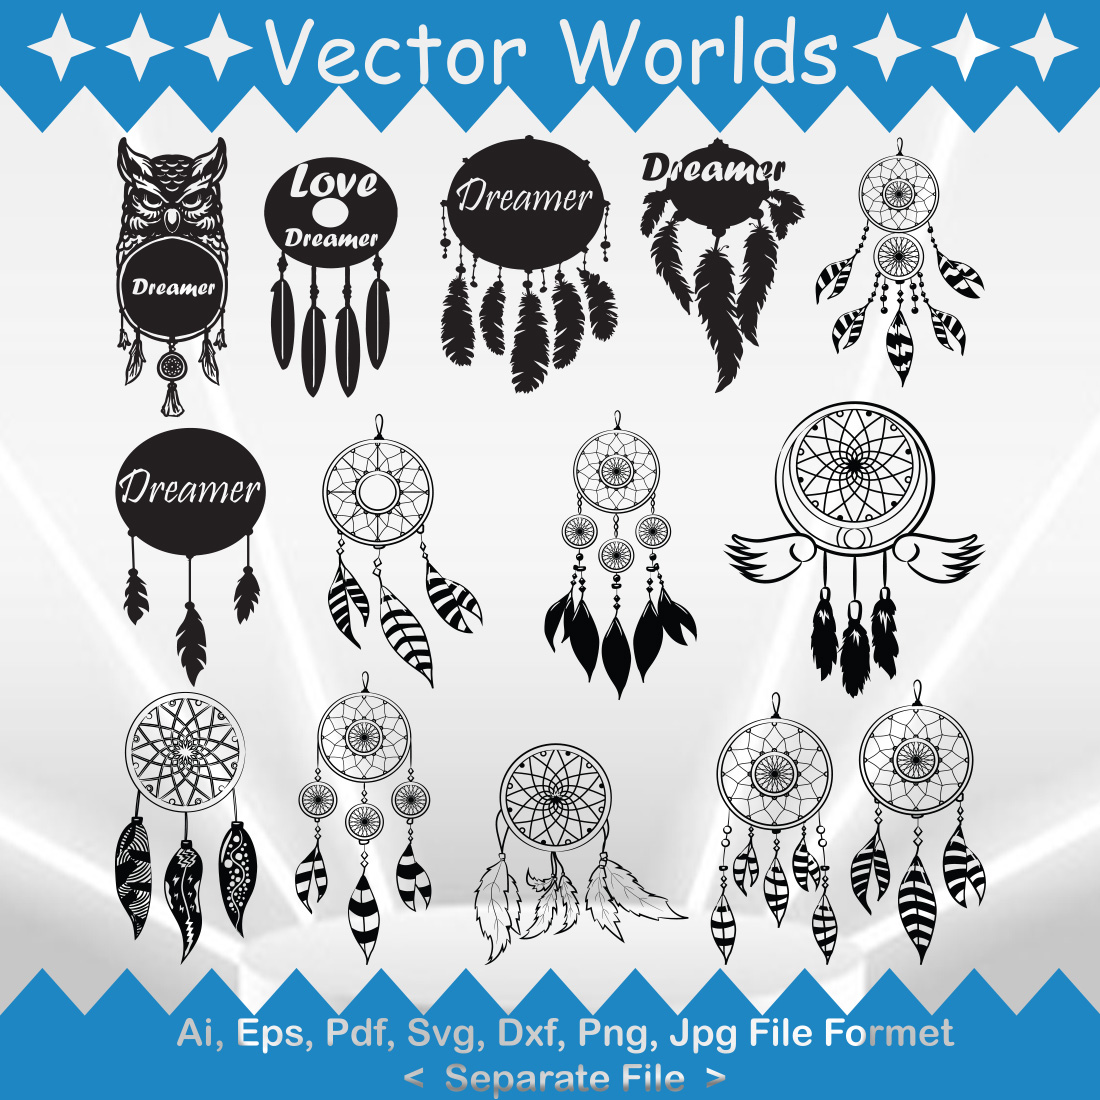 A collection of gorgeous Dream Catcher silhouette images